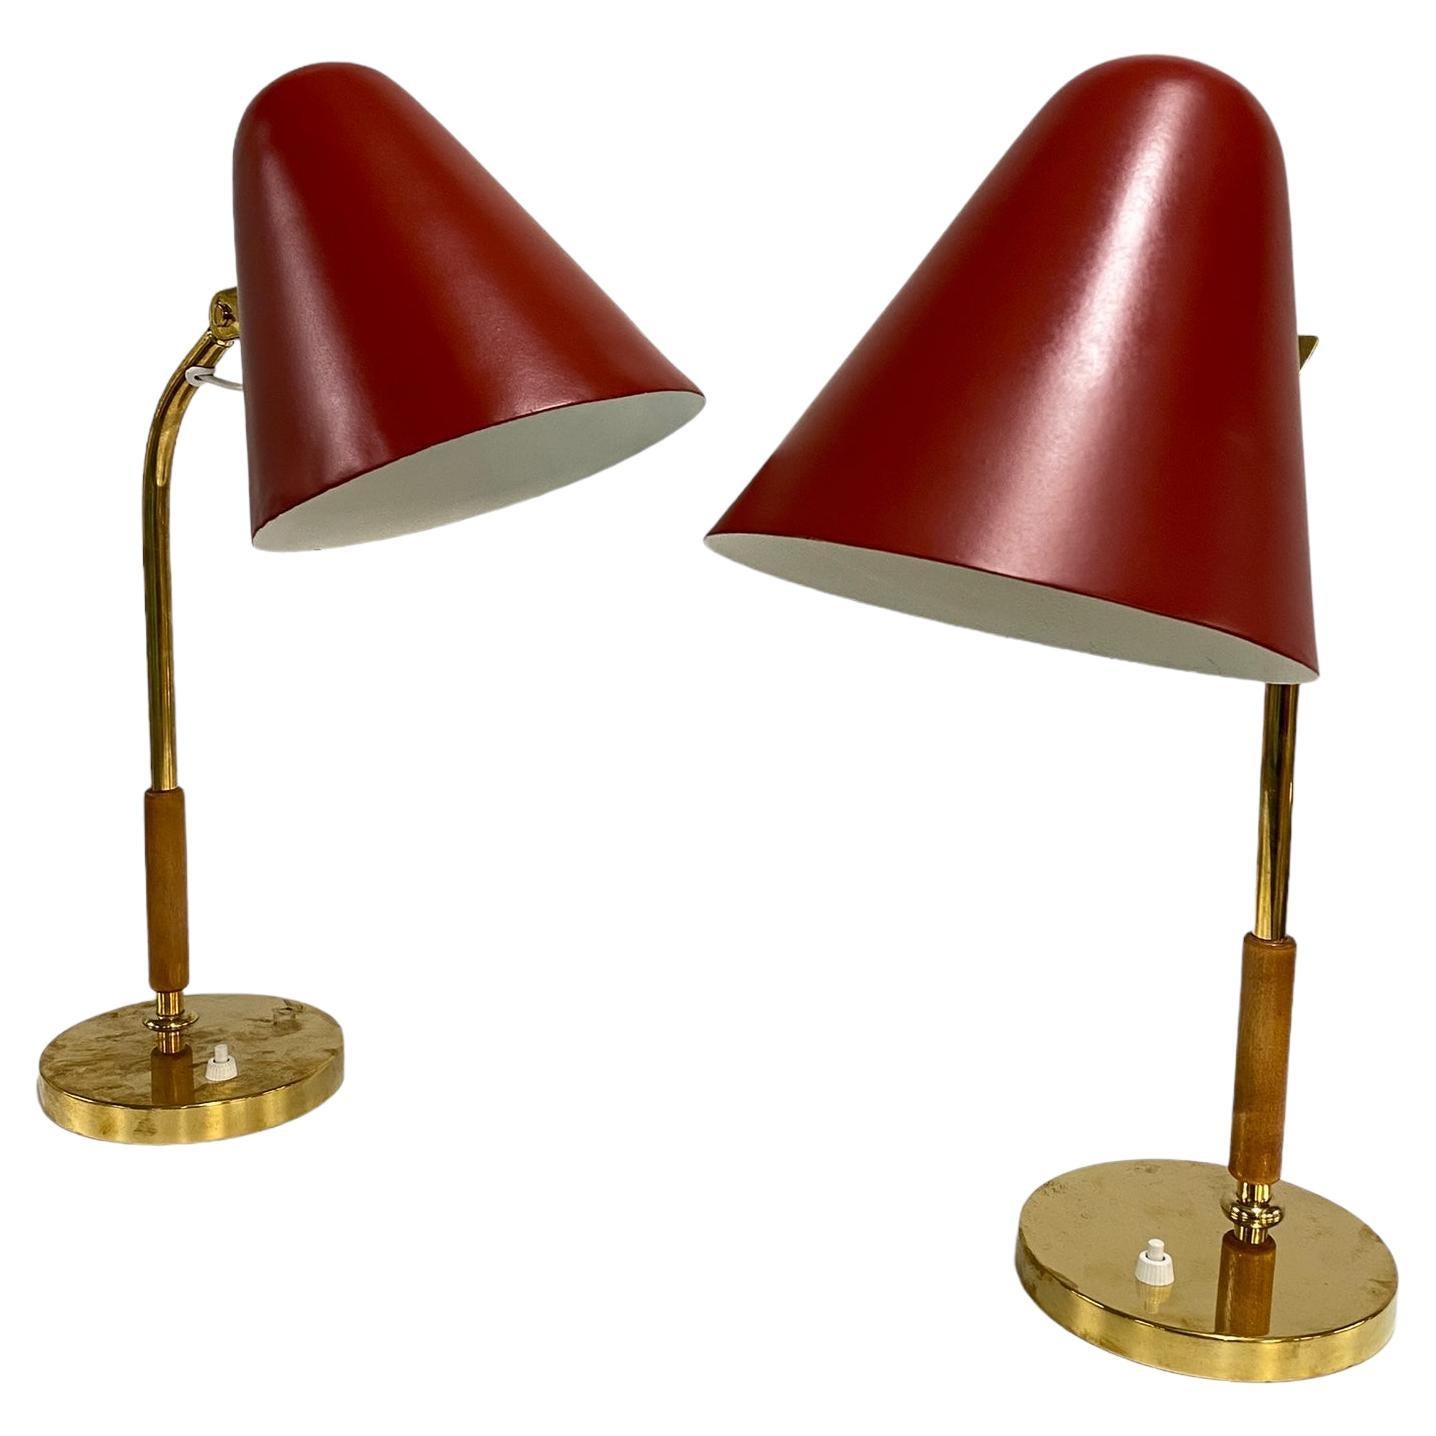 A Pair of Paavo Tynell Table lamps, Model no. 5233, 1950s, Taito Oy